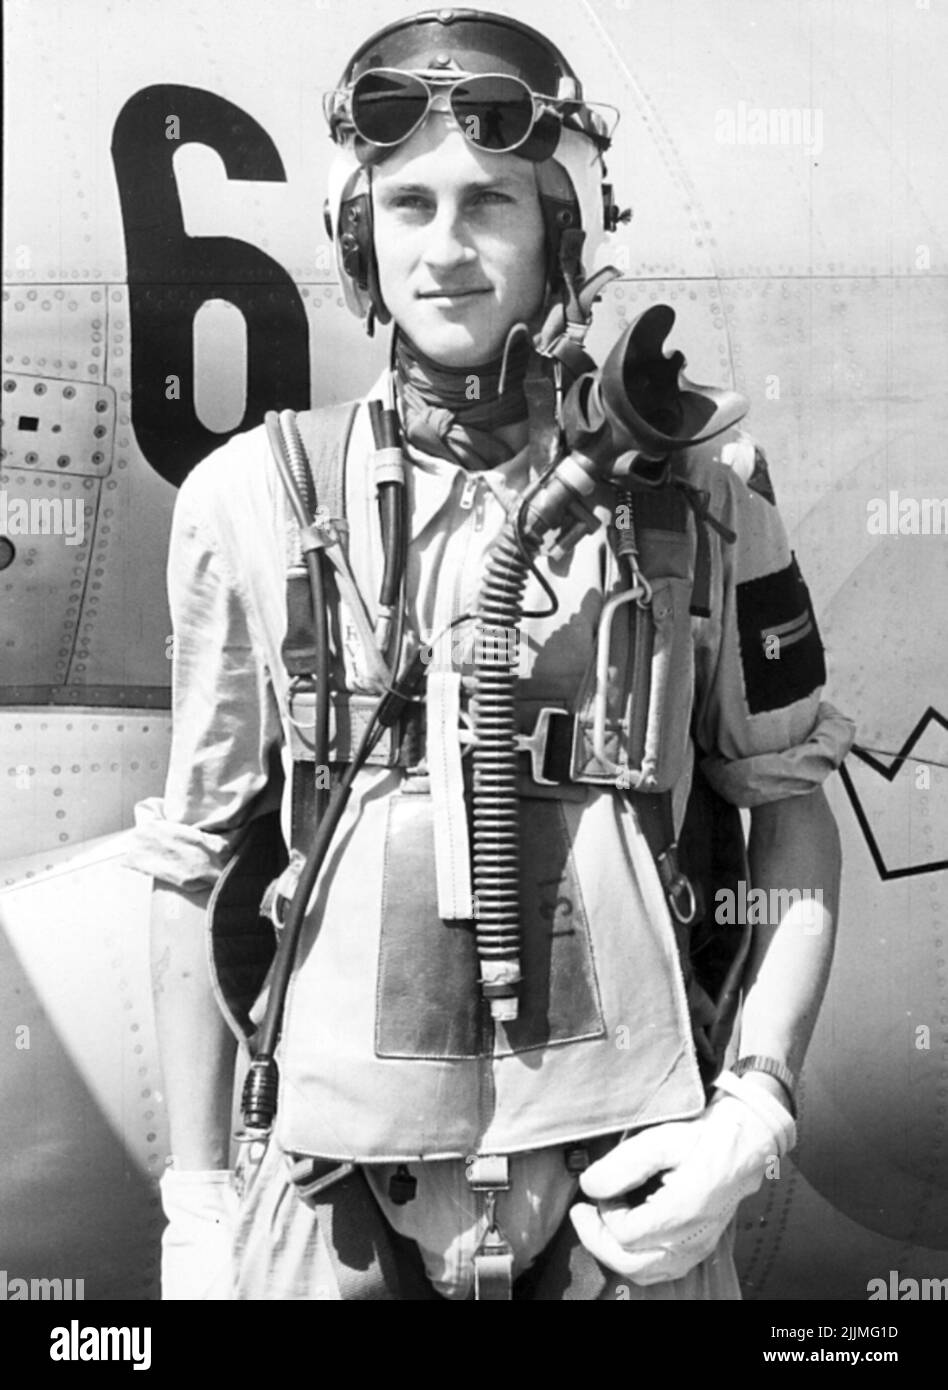 F6 Karlsborg 1956. Field pilot Nils Arne Nilsson dressed in the G-suit closest to the body and summer flight. Aircraft F6 A29 in the background. Stock Photo